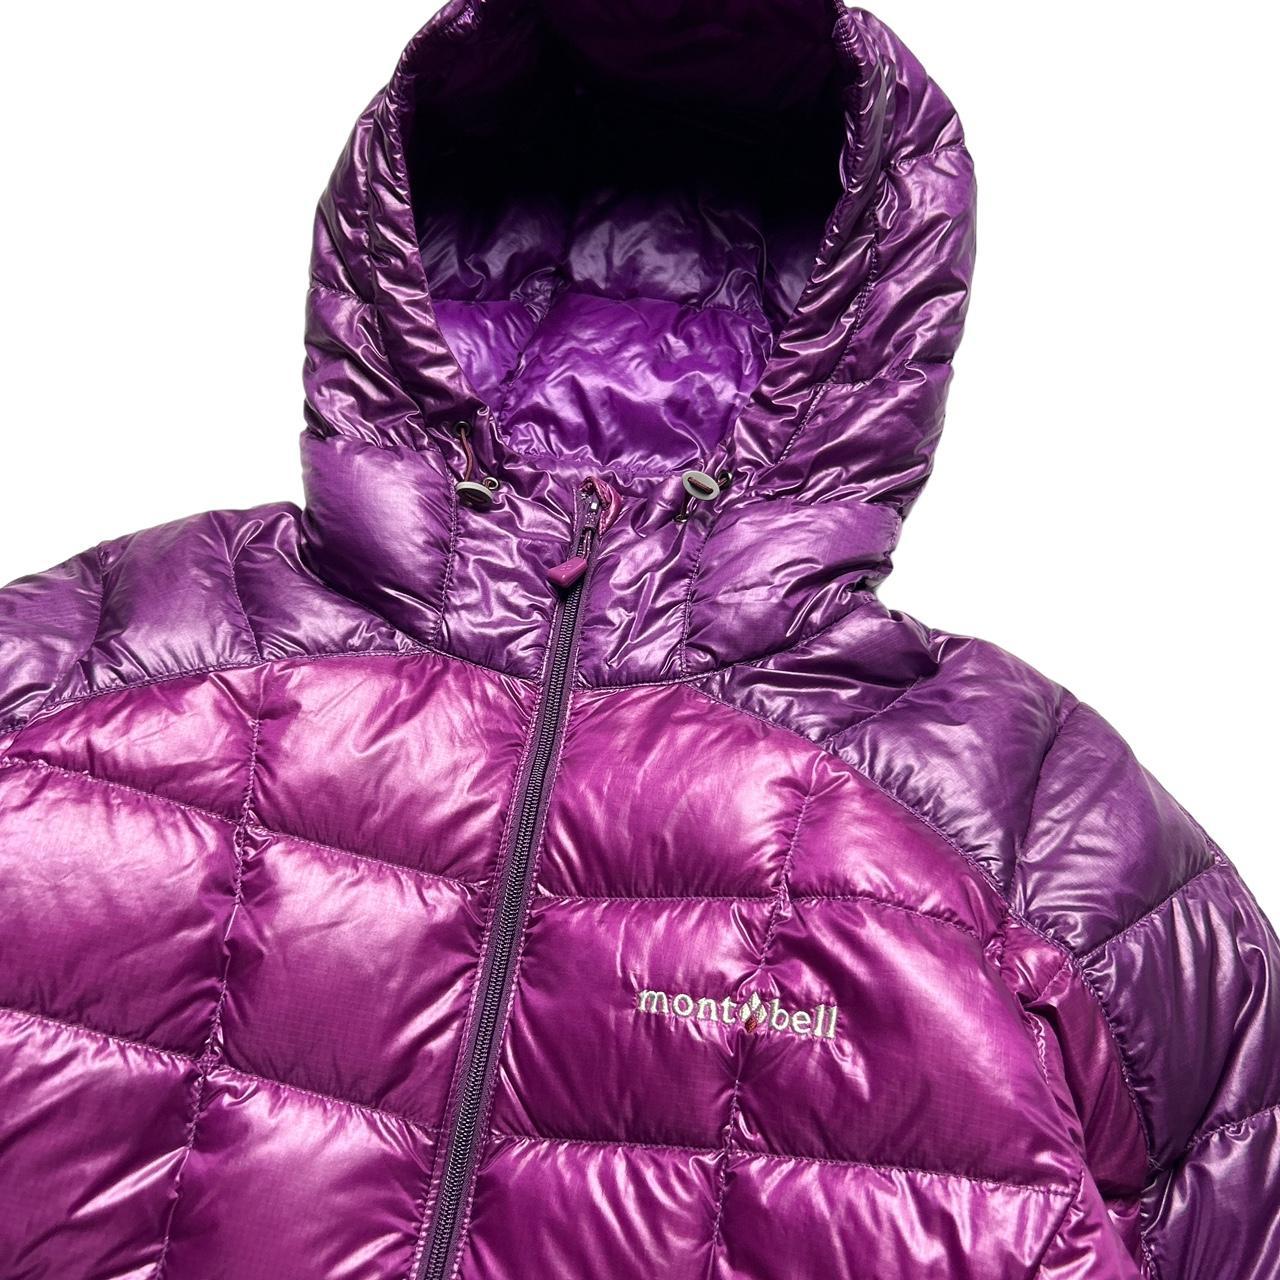 Montbell Puffer (M)